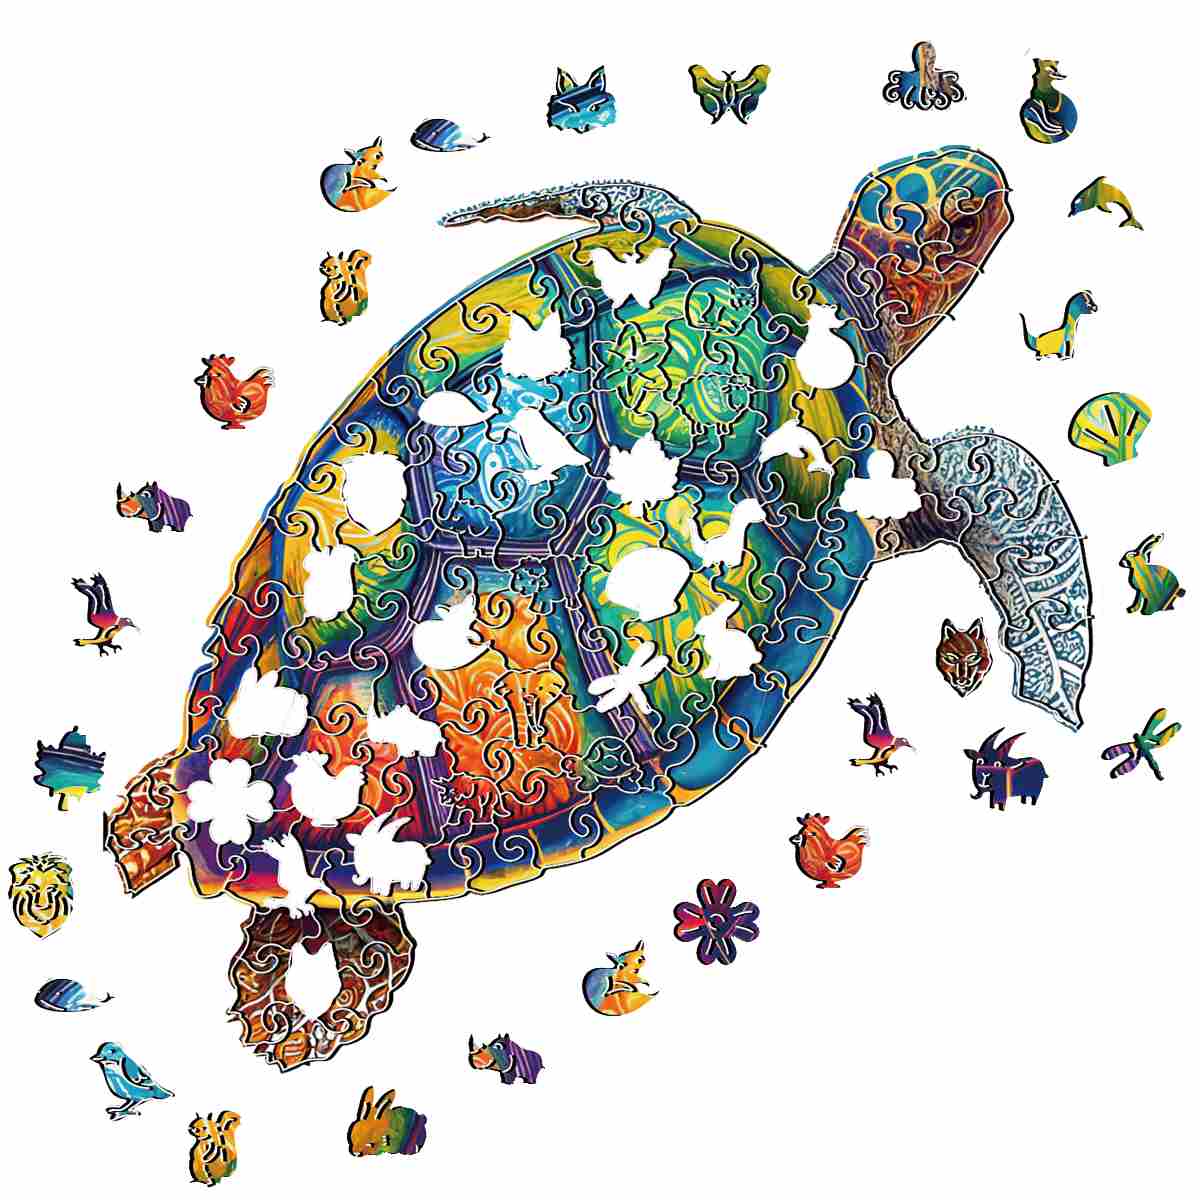 Animal Jigsaw Puzzle > Wooden Jigsaw Puzzle > Jigsaw Puzzle Colorful Turtle - Jigsaw Puzzle